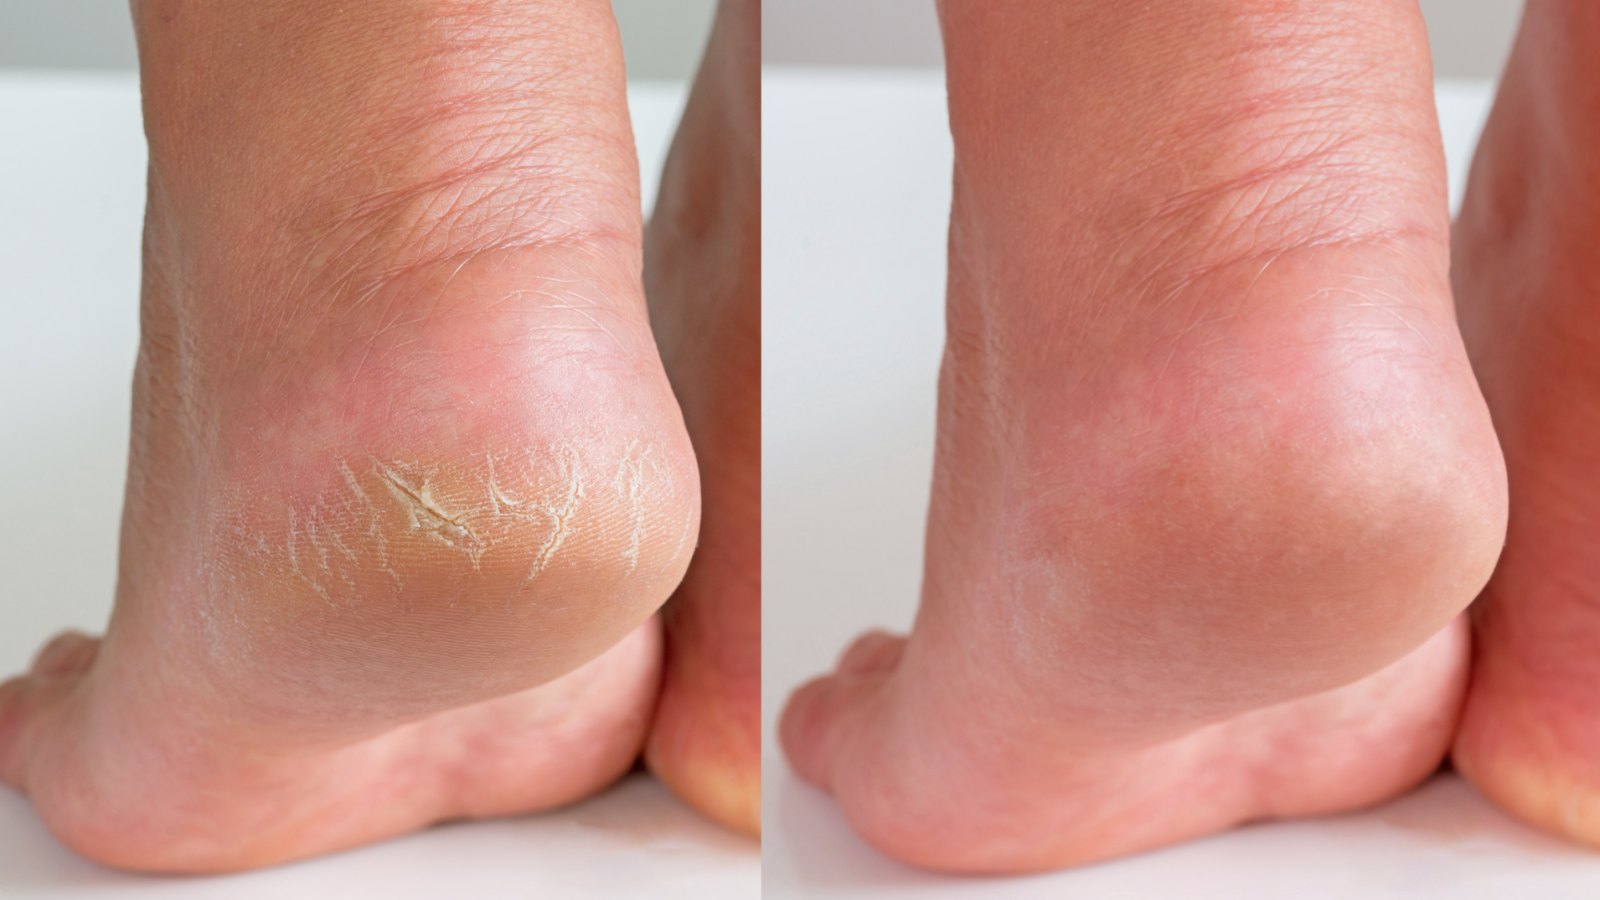 7 Foot Treatments That May Heal Dry and Cracked Skin for Good